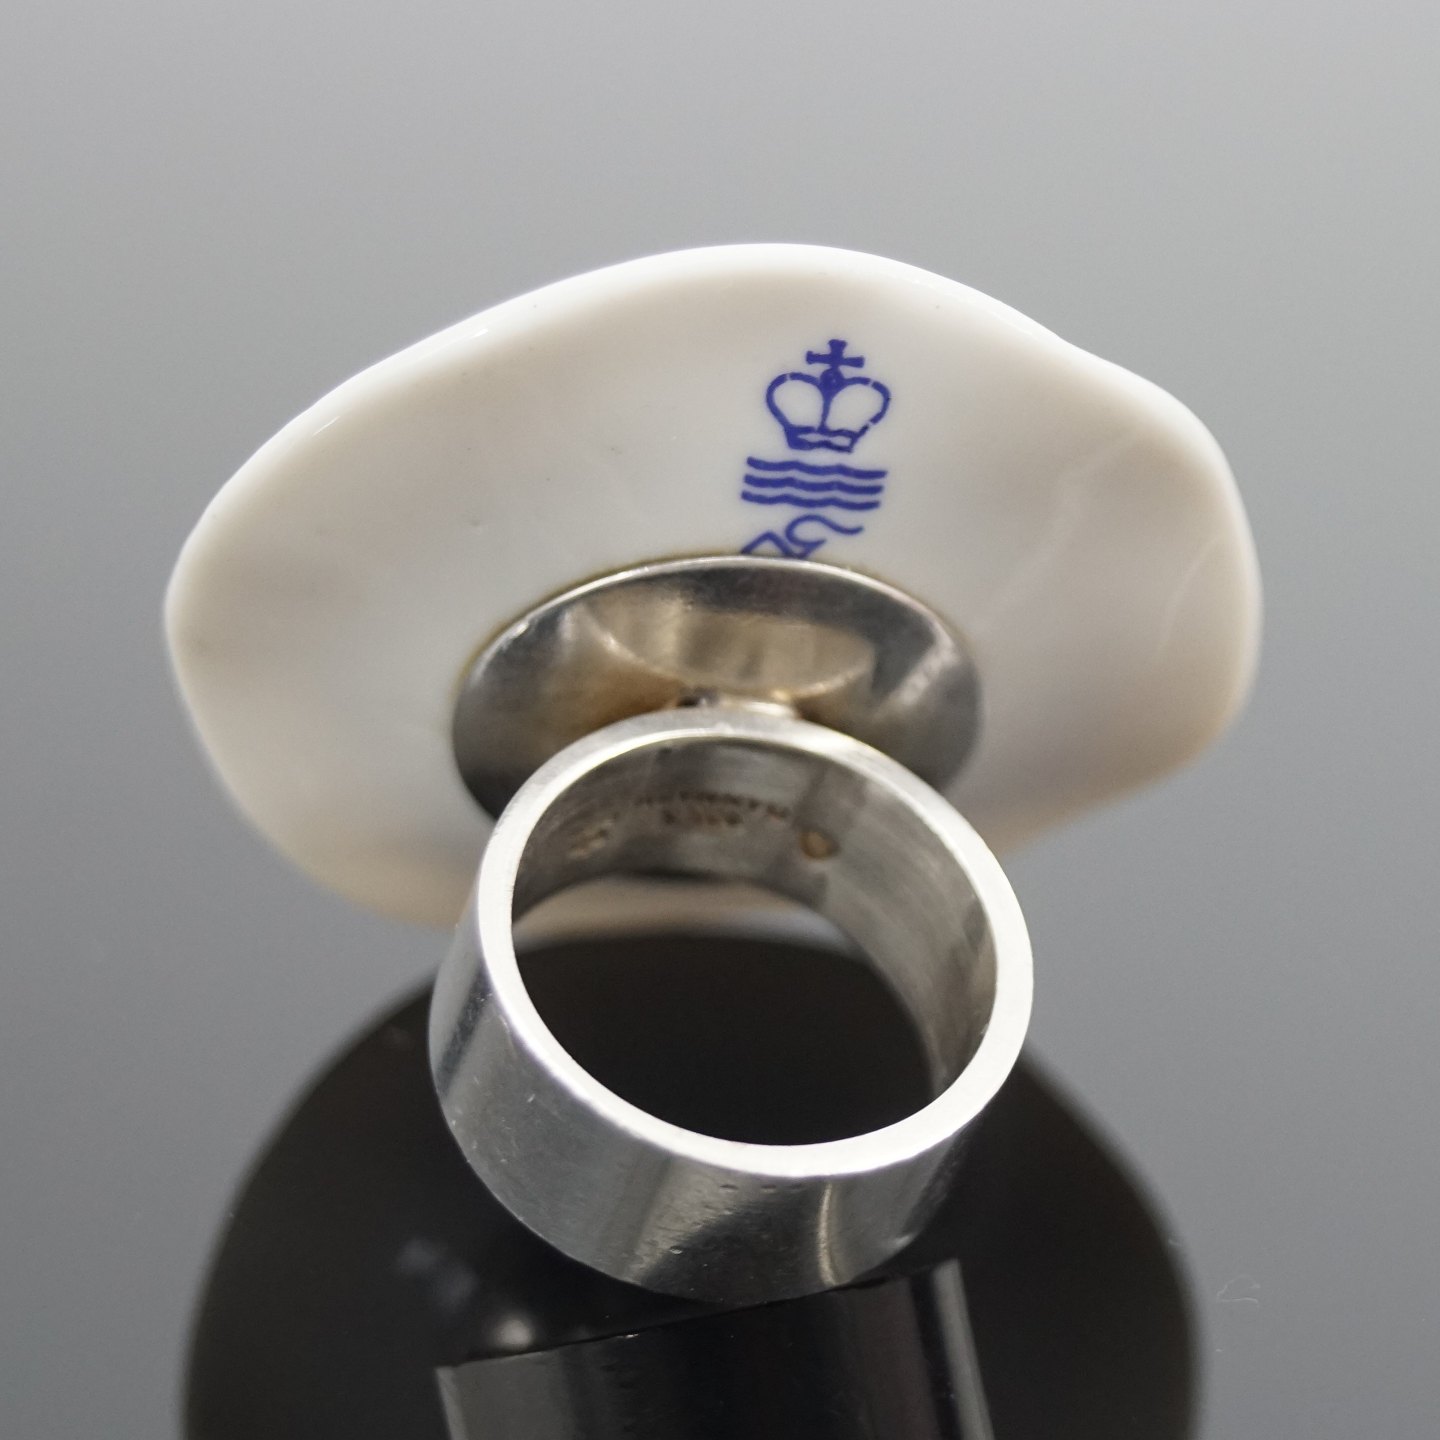 WorldAntique.net - A. and Royal Copenhagen; A ring of sterling silver and porcelain